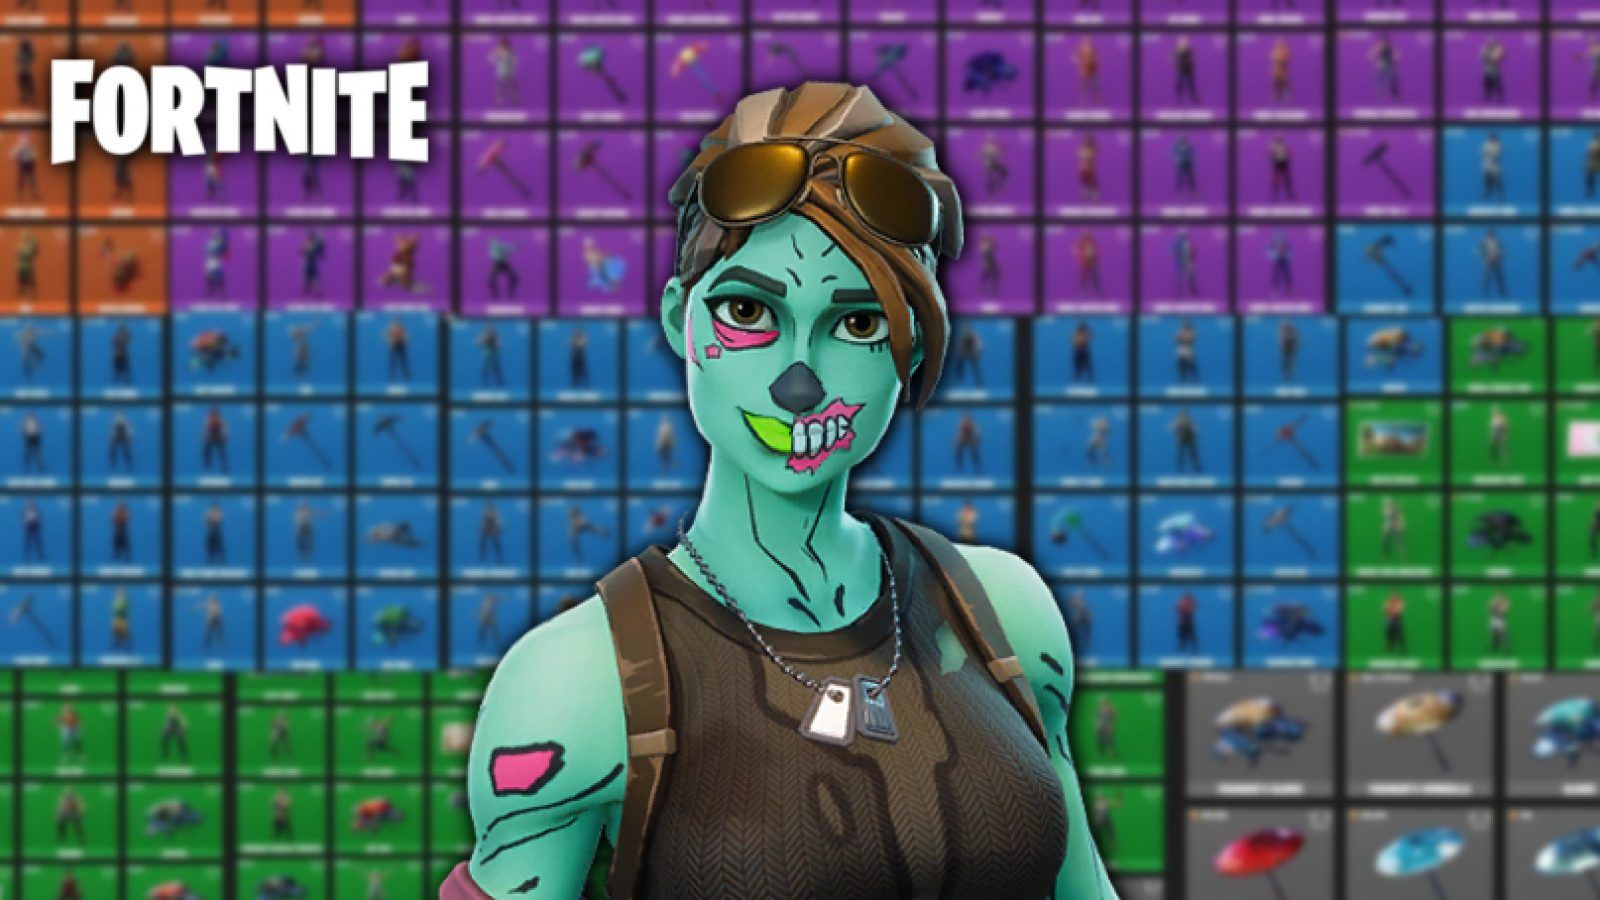 Top five rarest Fortnite skins, gliders, pickaxes, and emotes as